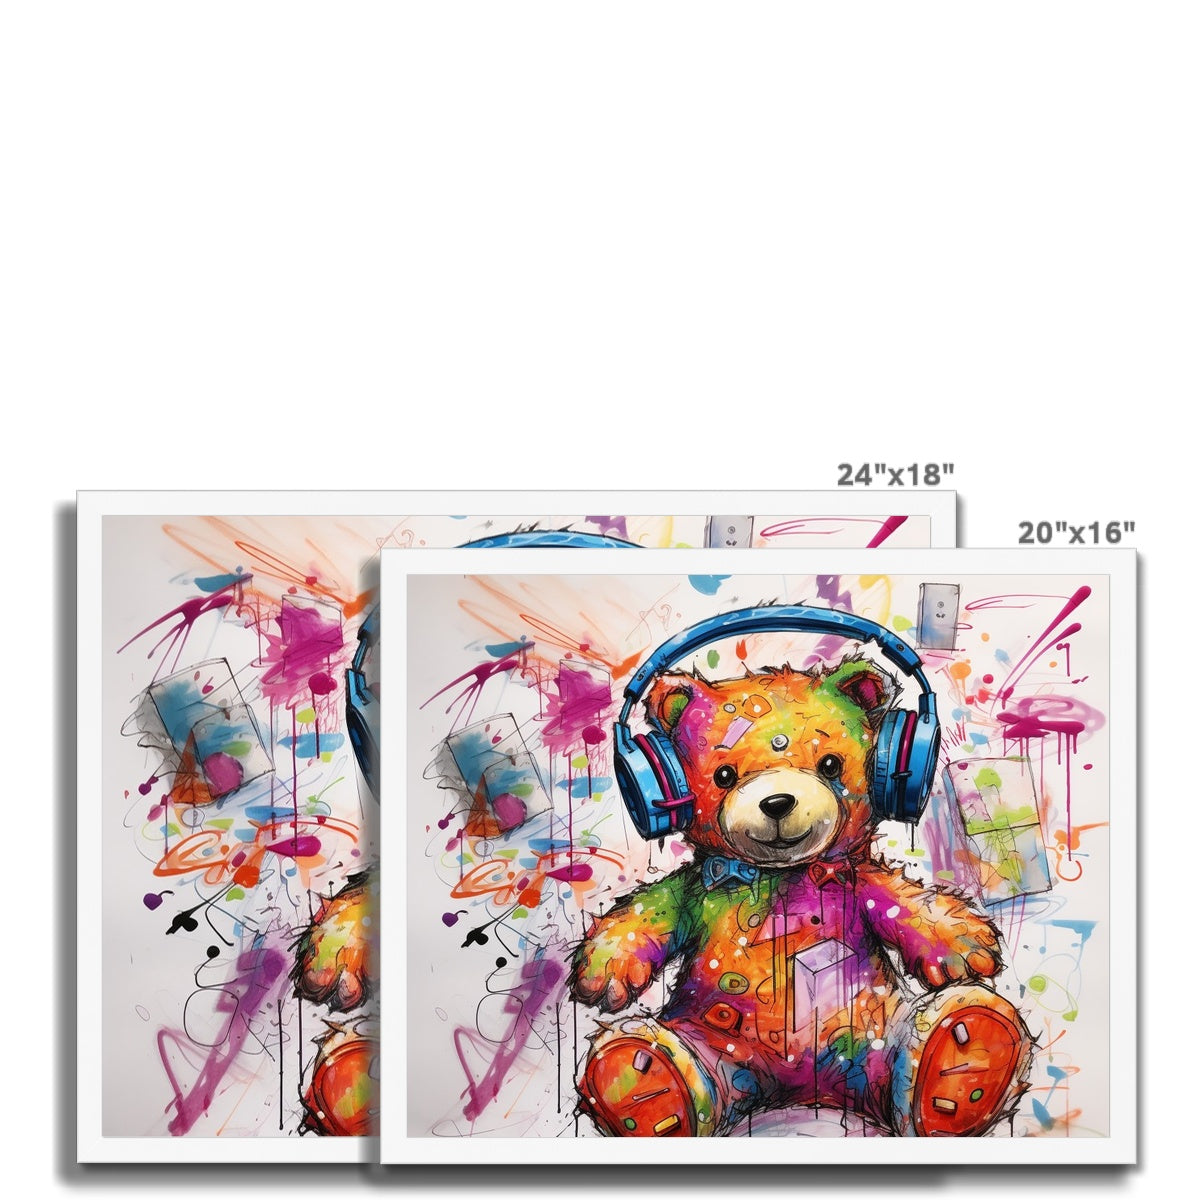 Beats By Teddy: Limited Edition Framed Print